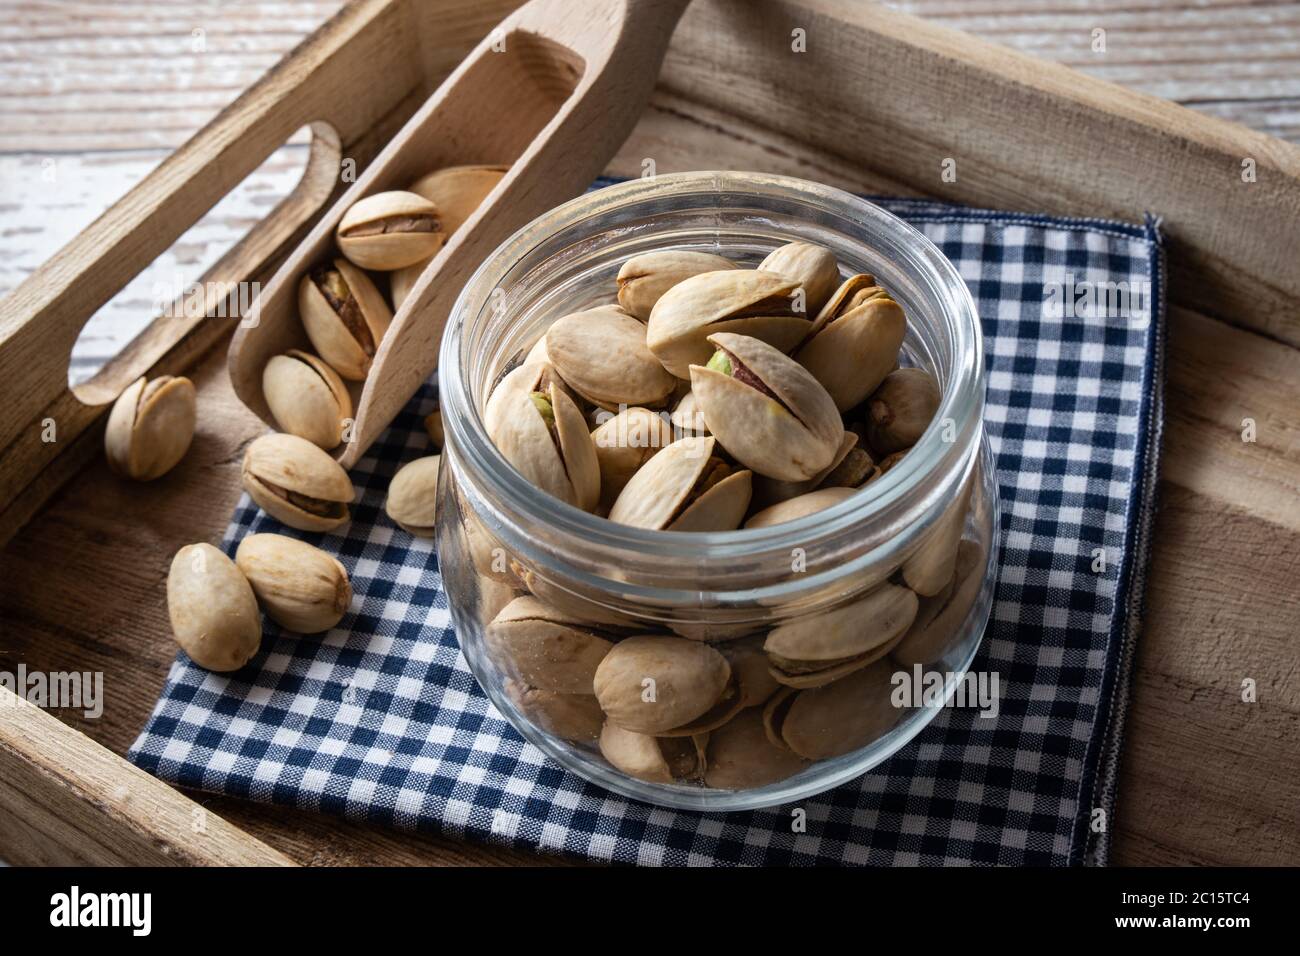 Pistachio nuts inside bowl on rustic table. Pistachios are healthy nuts packed with fiber and antioxidants. Natural source of vitamins, often found in Stock Photo